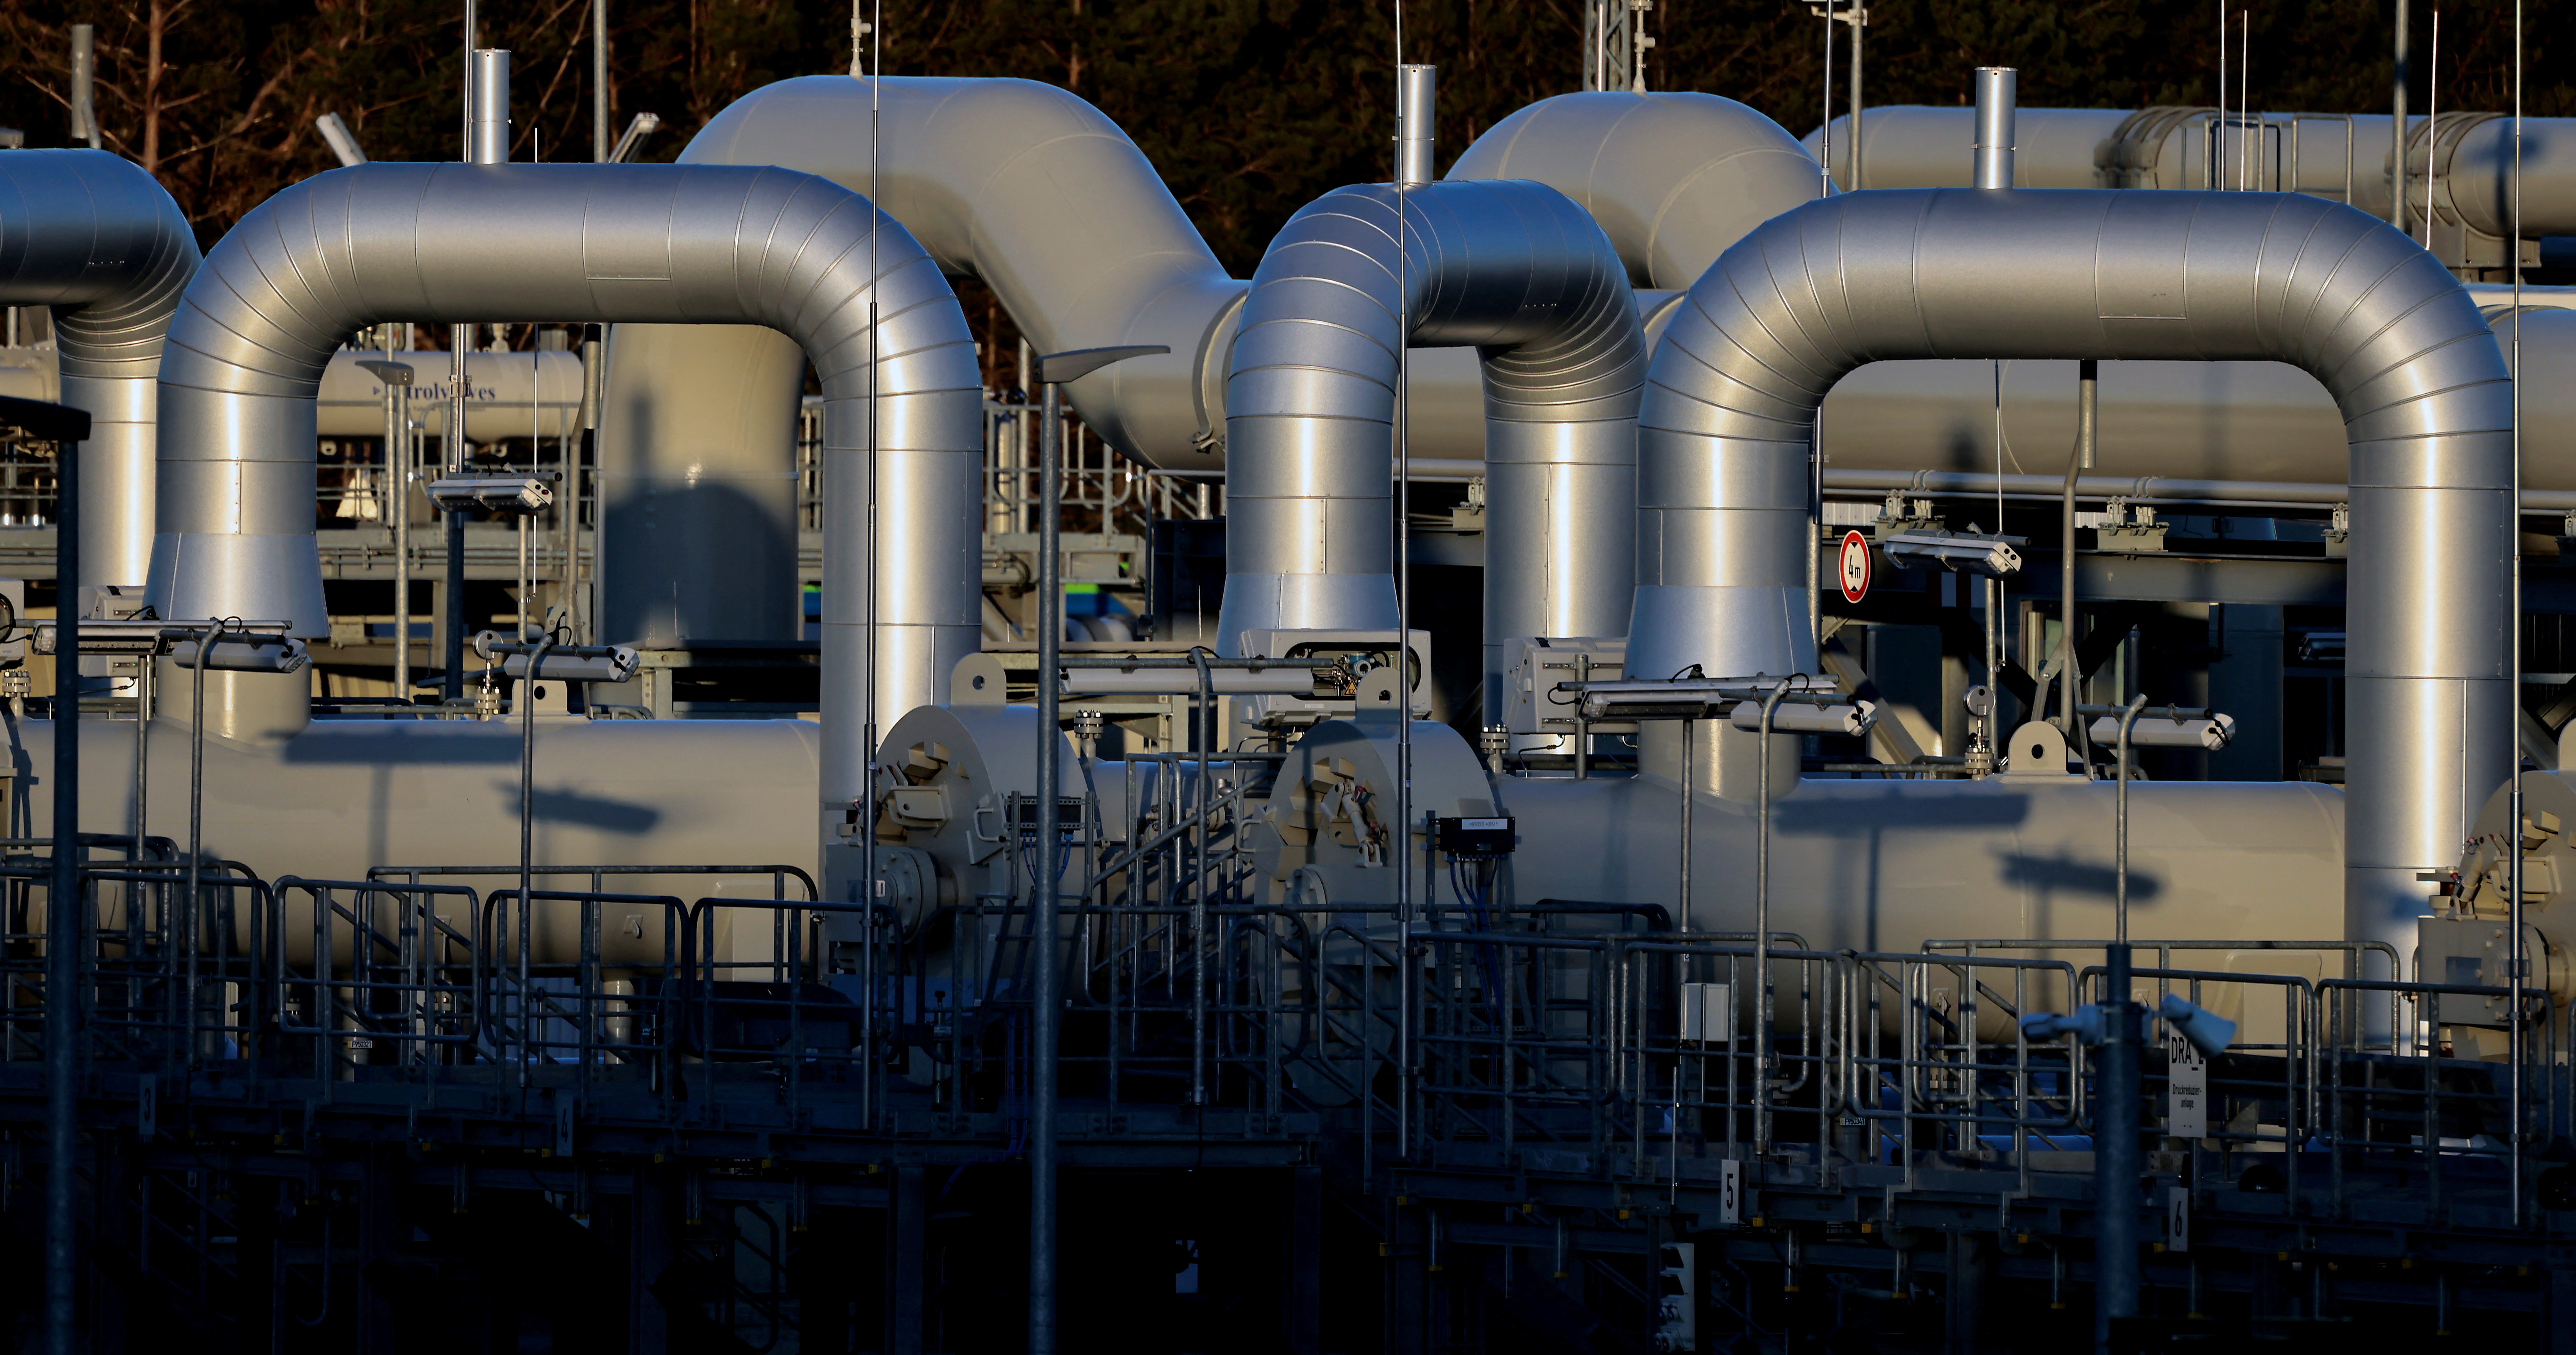 Pipes at the landfall facilities of the 'Nord Stream 2' gas pipeline in Lubmin